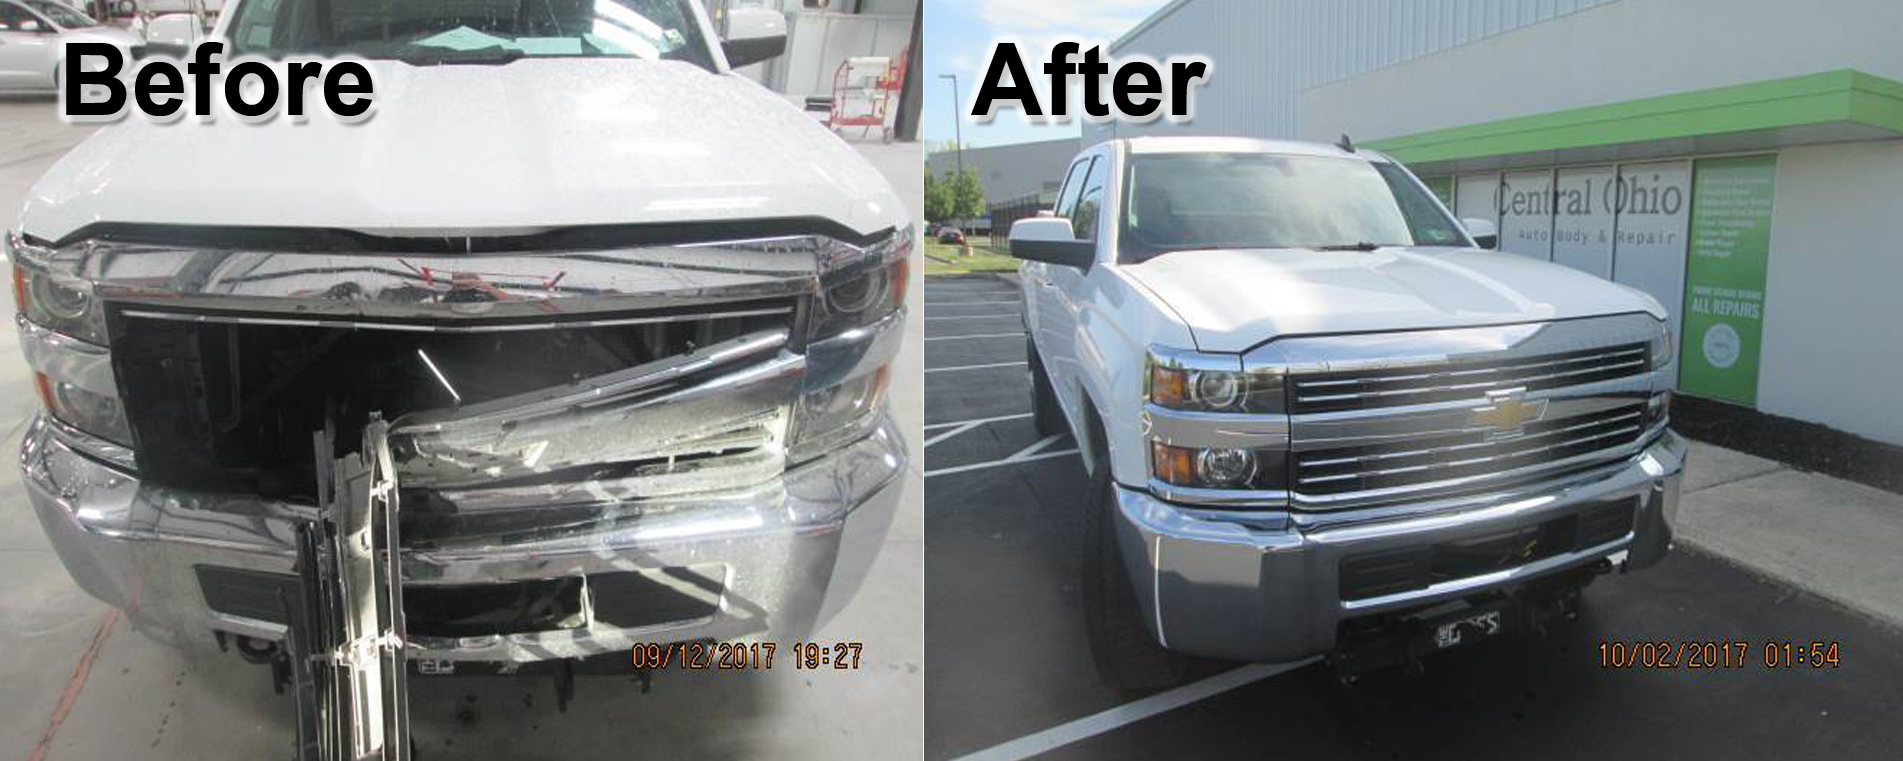 Before and After Truck Picture